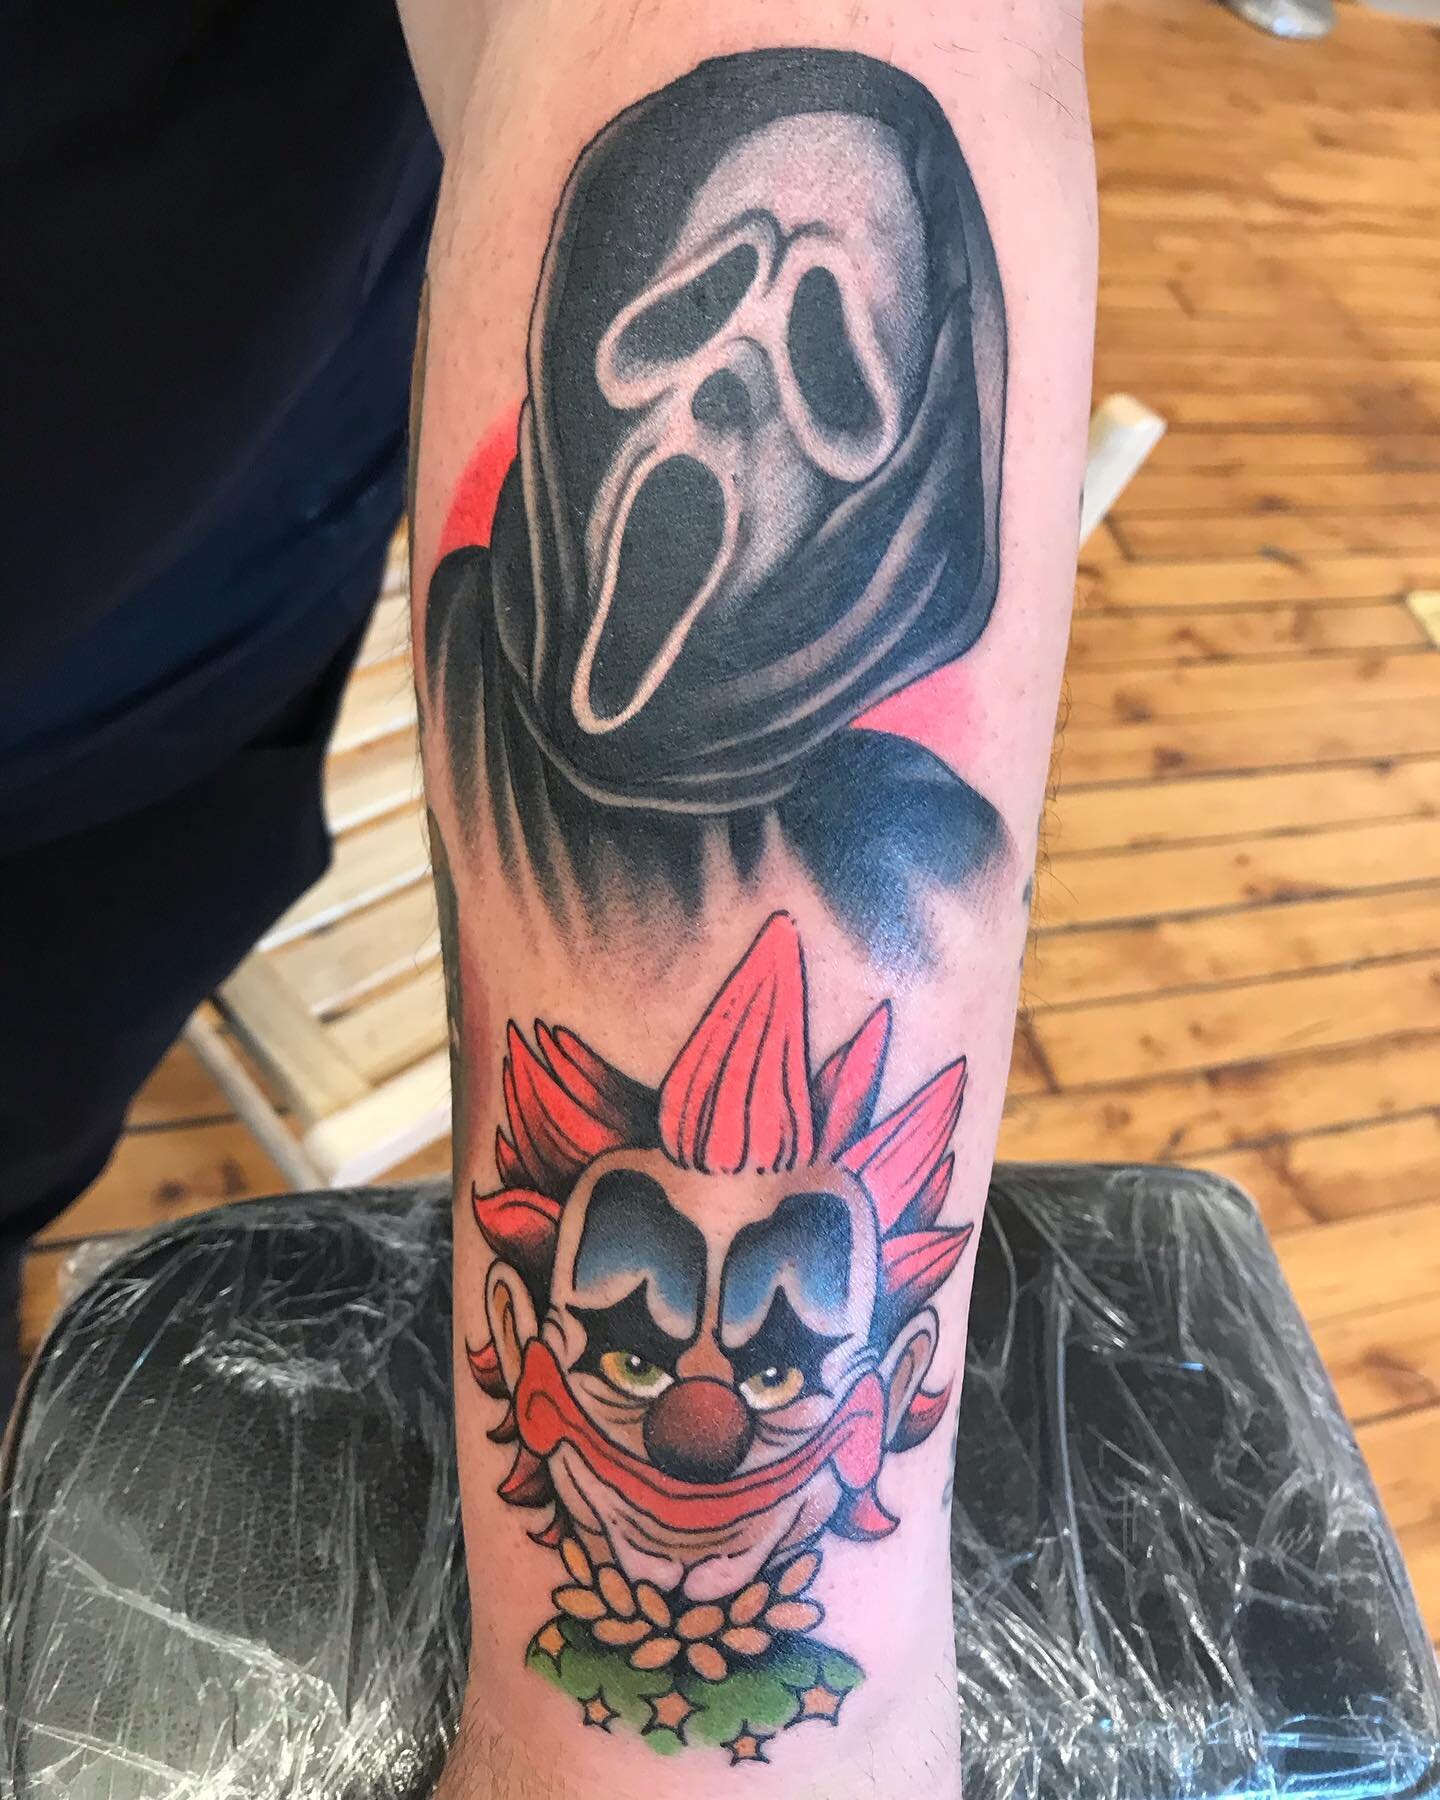 @shmebin412 and I had a trip down memory lane talking about these movies and the effect they had on our young minds. I think we turned out great. Thanks Big D! Made here at #threeriverstattoo #pittsburghtattooer